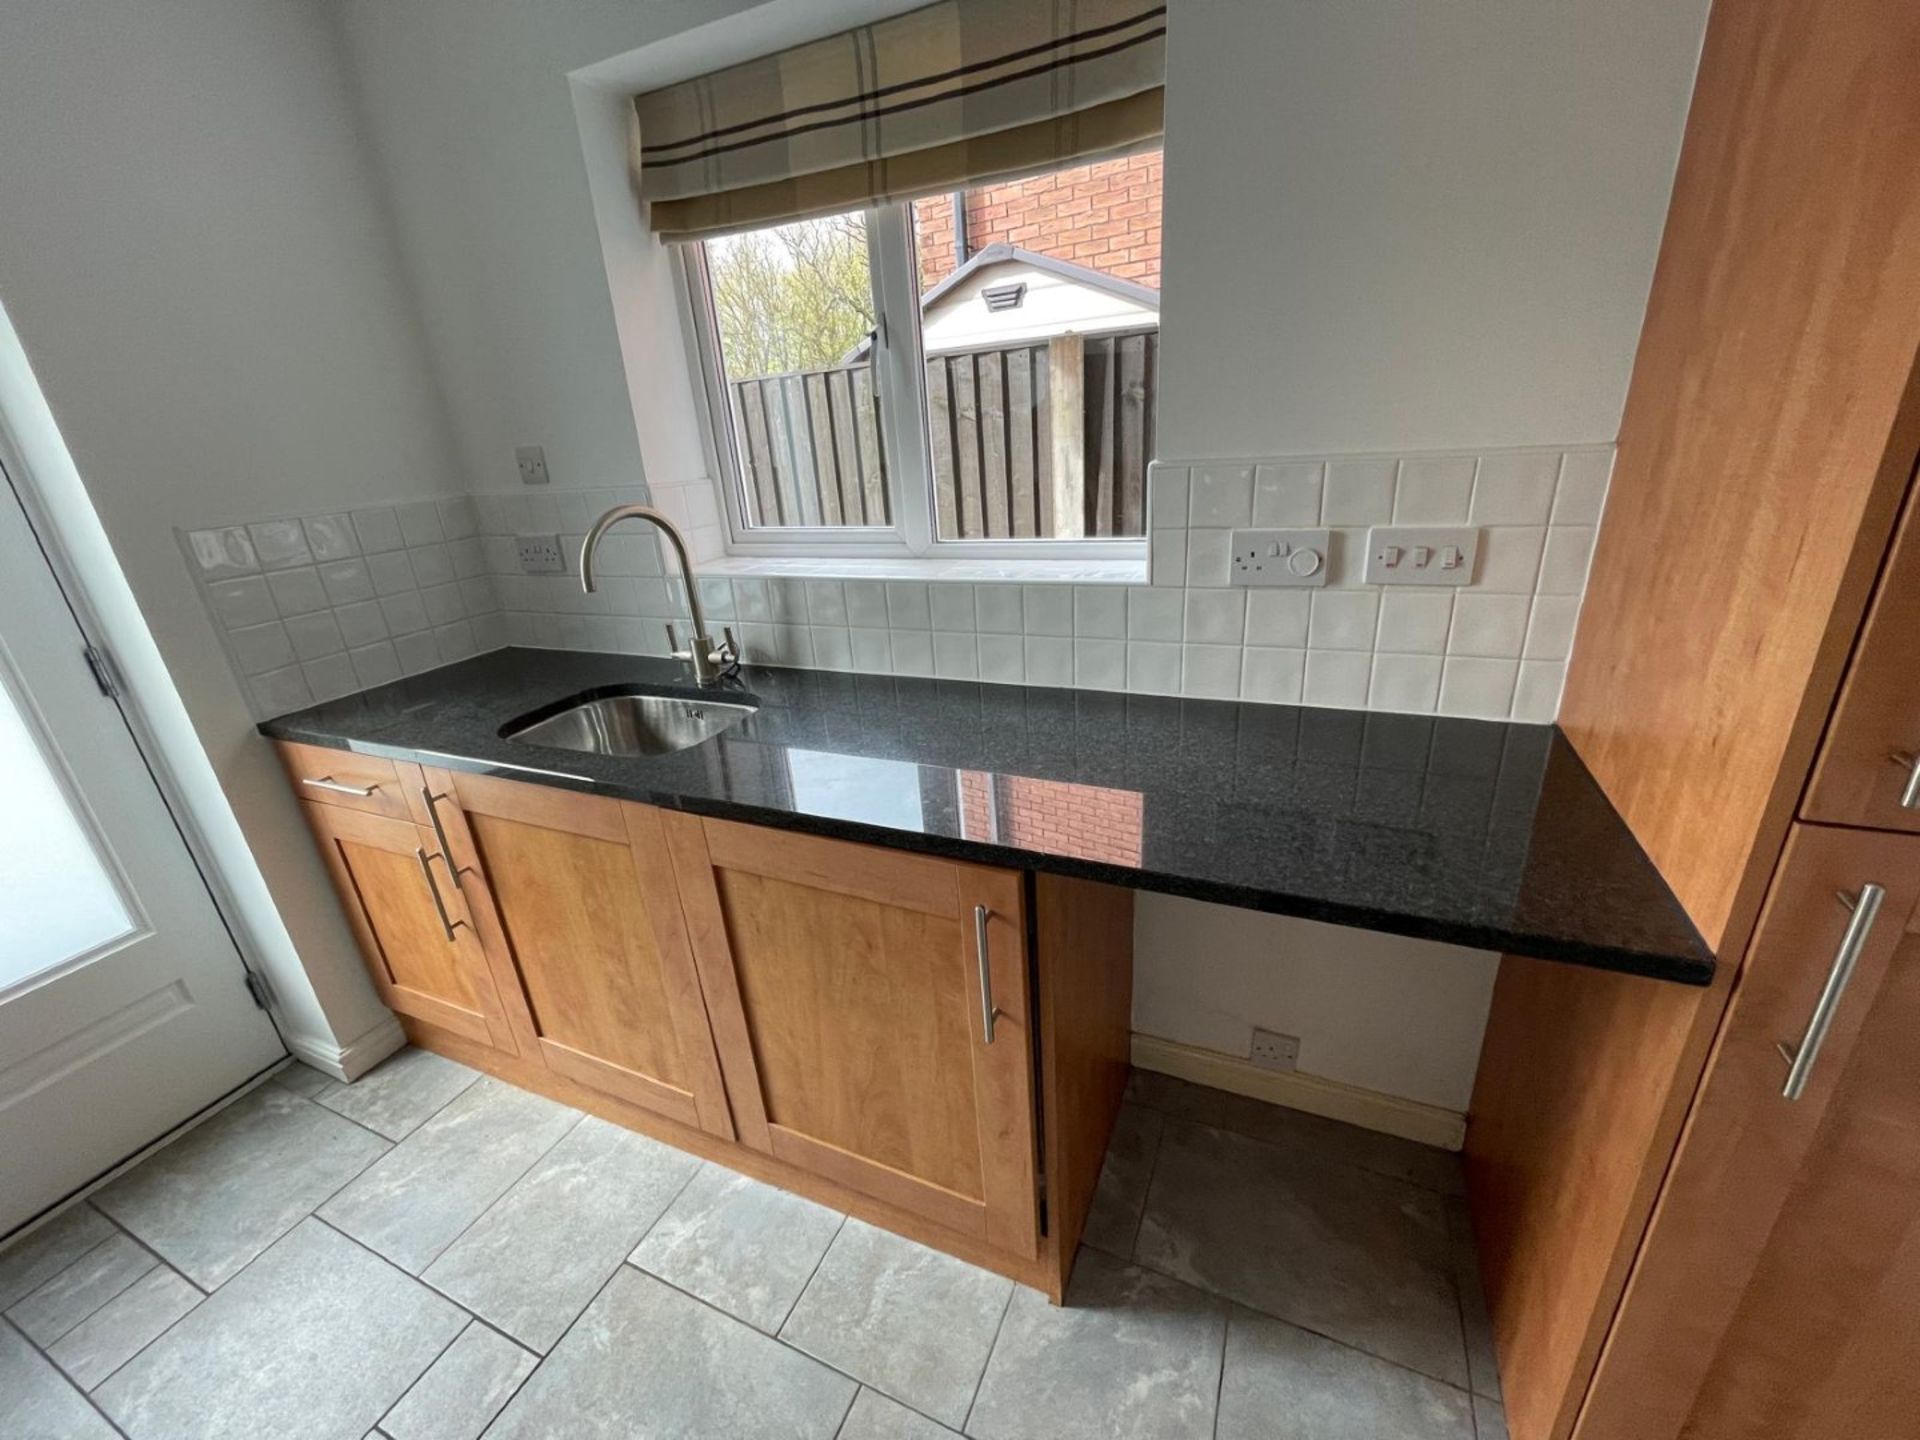 1 x Shaker-style, Feature-rich Fitted Kitchen with Solid Wood Doors, Granite Worktops and Appliances - Image 19 of 111